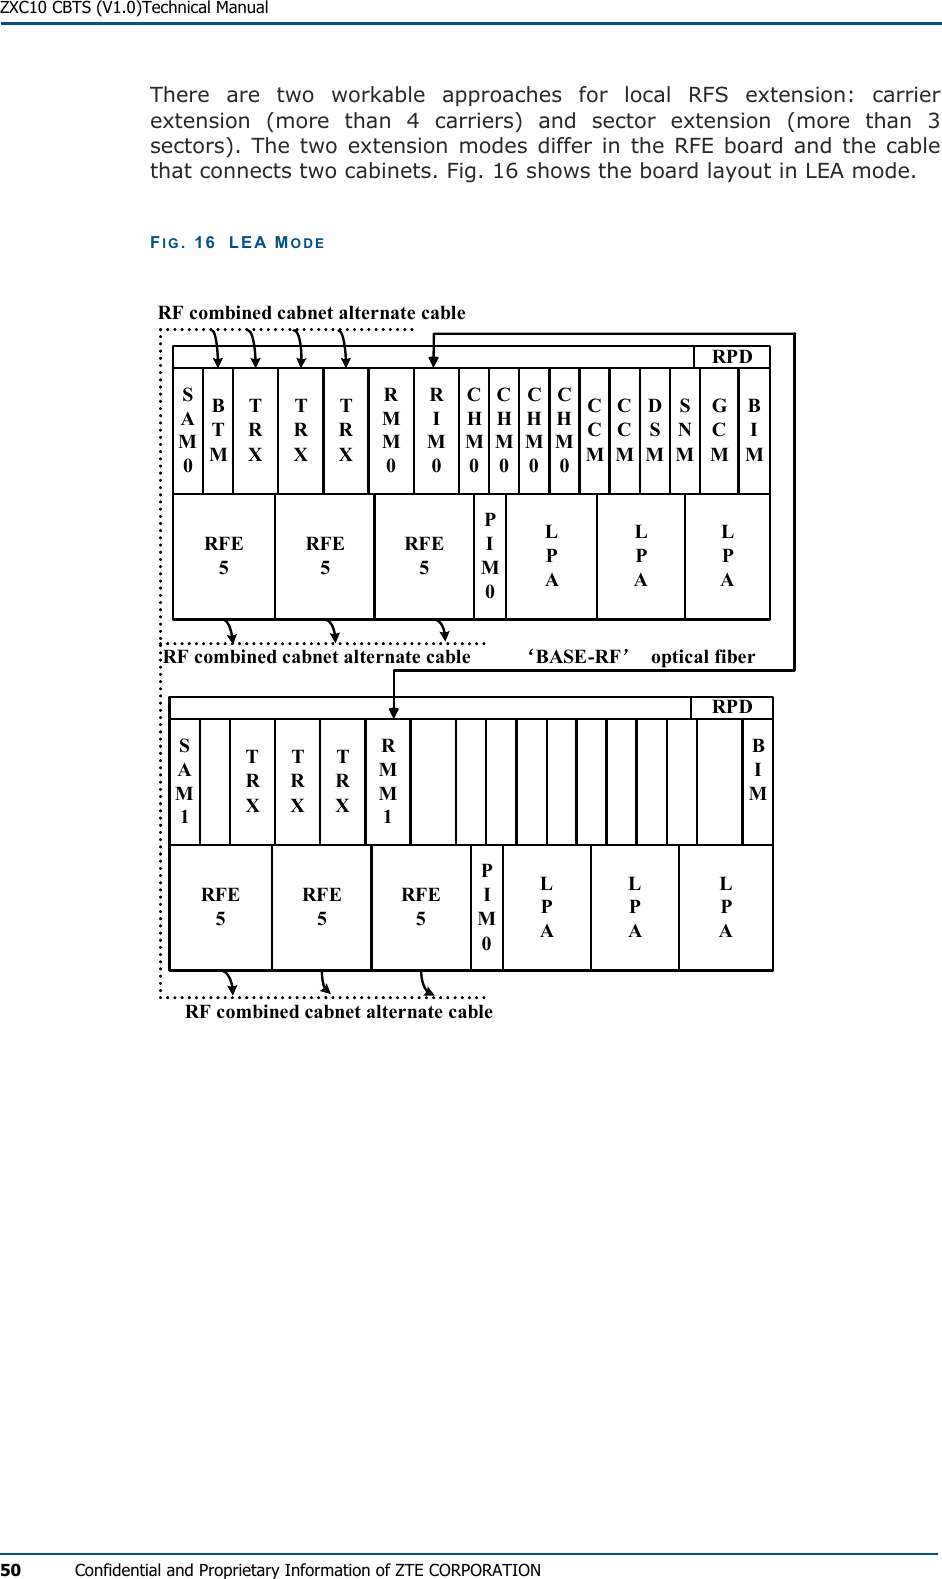  ZXC10 CBTS (V1.0)Technical Manual 50  Confidential and Proprietary Information of ZTE CORPORATION There are two workable approaches for local RFS extension: carrier extension (more than 4 carriers) and sector extension (more than 3 sectors). The two extension modes differ in the RFE board and the cable that connects two cabinets. Fig. 16 shows the board layout in LEA mode.  FIG. 16  LEA MODE CHM0CHM0TRXTRXTRXRMM0RIM0RPDSAM0CCMCCMDSMGCMLPAPIM0LPALPASNMBTMTRXTRXTRXRMM1RPDSAM1LPAPIM0LPALPACHM0CHM0RFE5RFE5RFE5RFE5RFE5RFE5‘BASE-RF’optical fiberRF combined cabnet alternate cableRF combined cabnet alternate cableRF combined cabnet alternate cableBIMBIM 